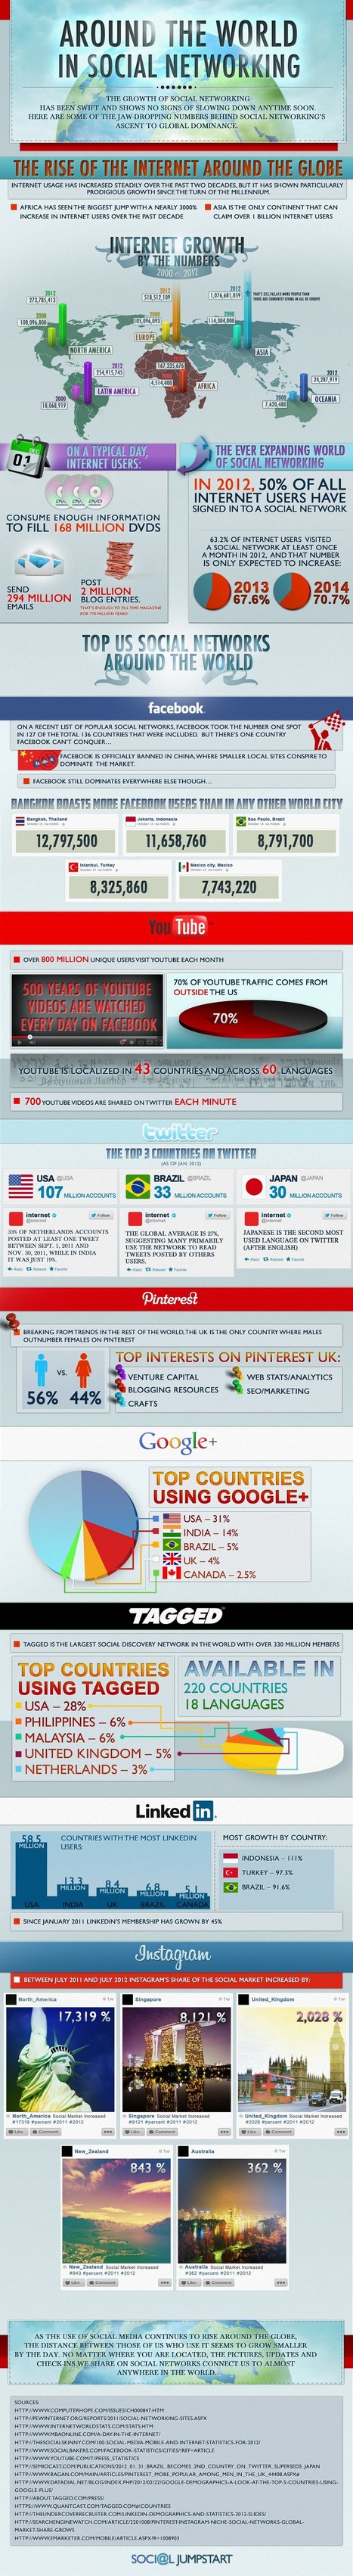 Social Media Around the World: A Complete Infographic Guide | E-Learning-Inclusivo (Mashup) | Scoop.it